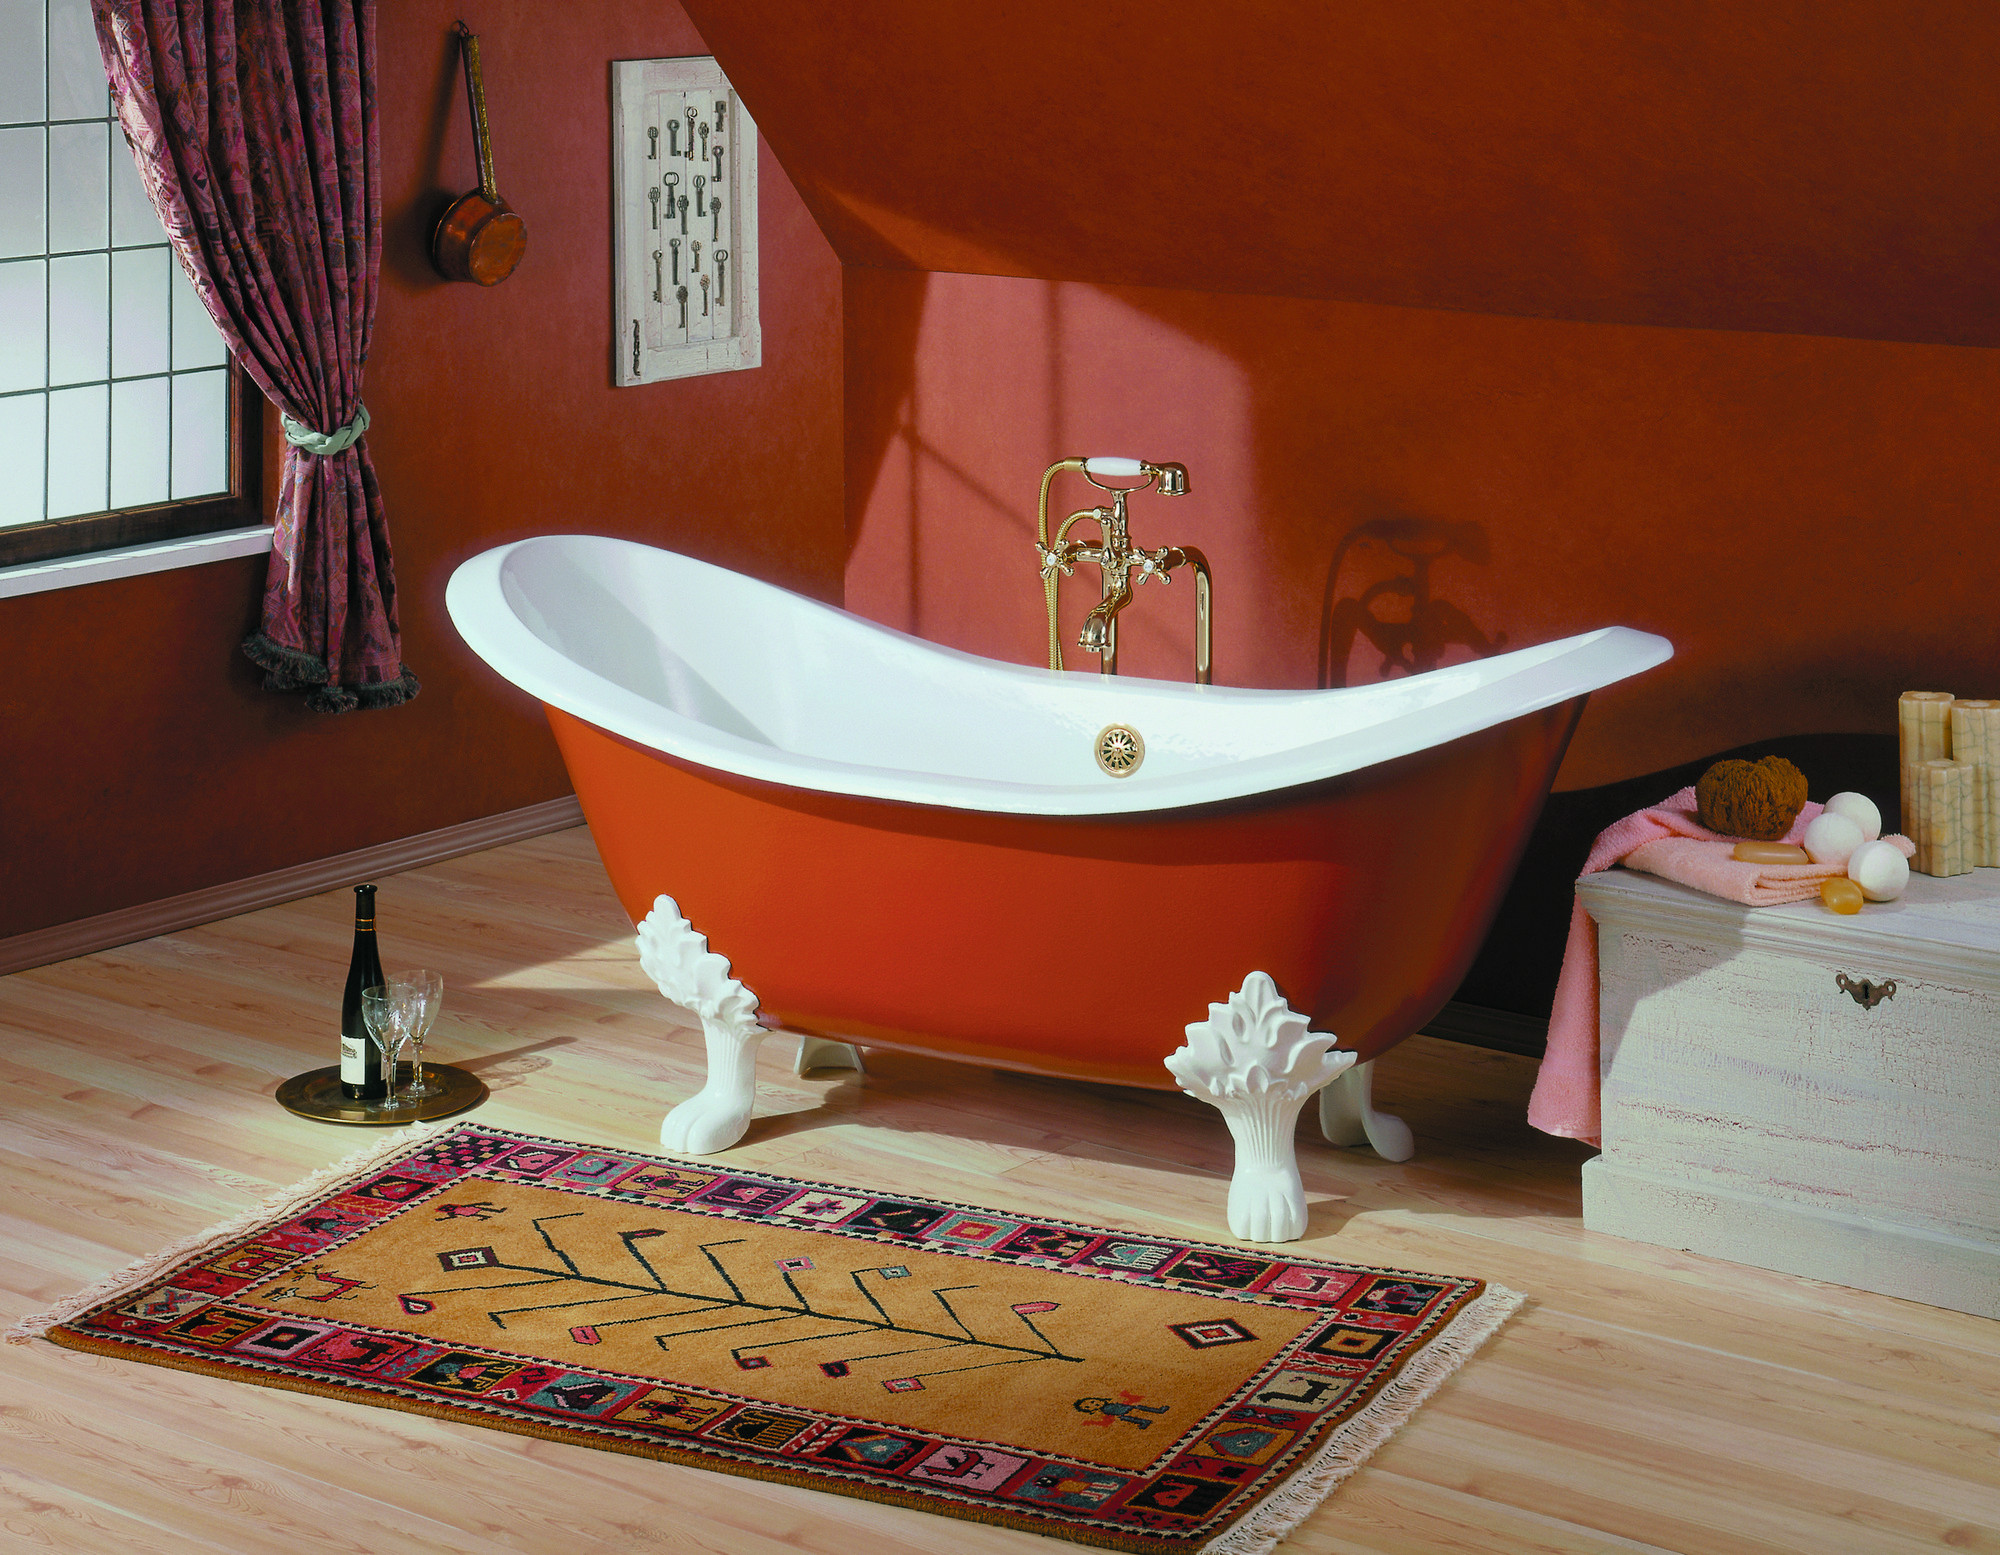 Cheviot 2167-BB-..-7 Regency Cast Iron Bathtub with Lion Feet and 7 Inch Drilling